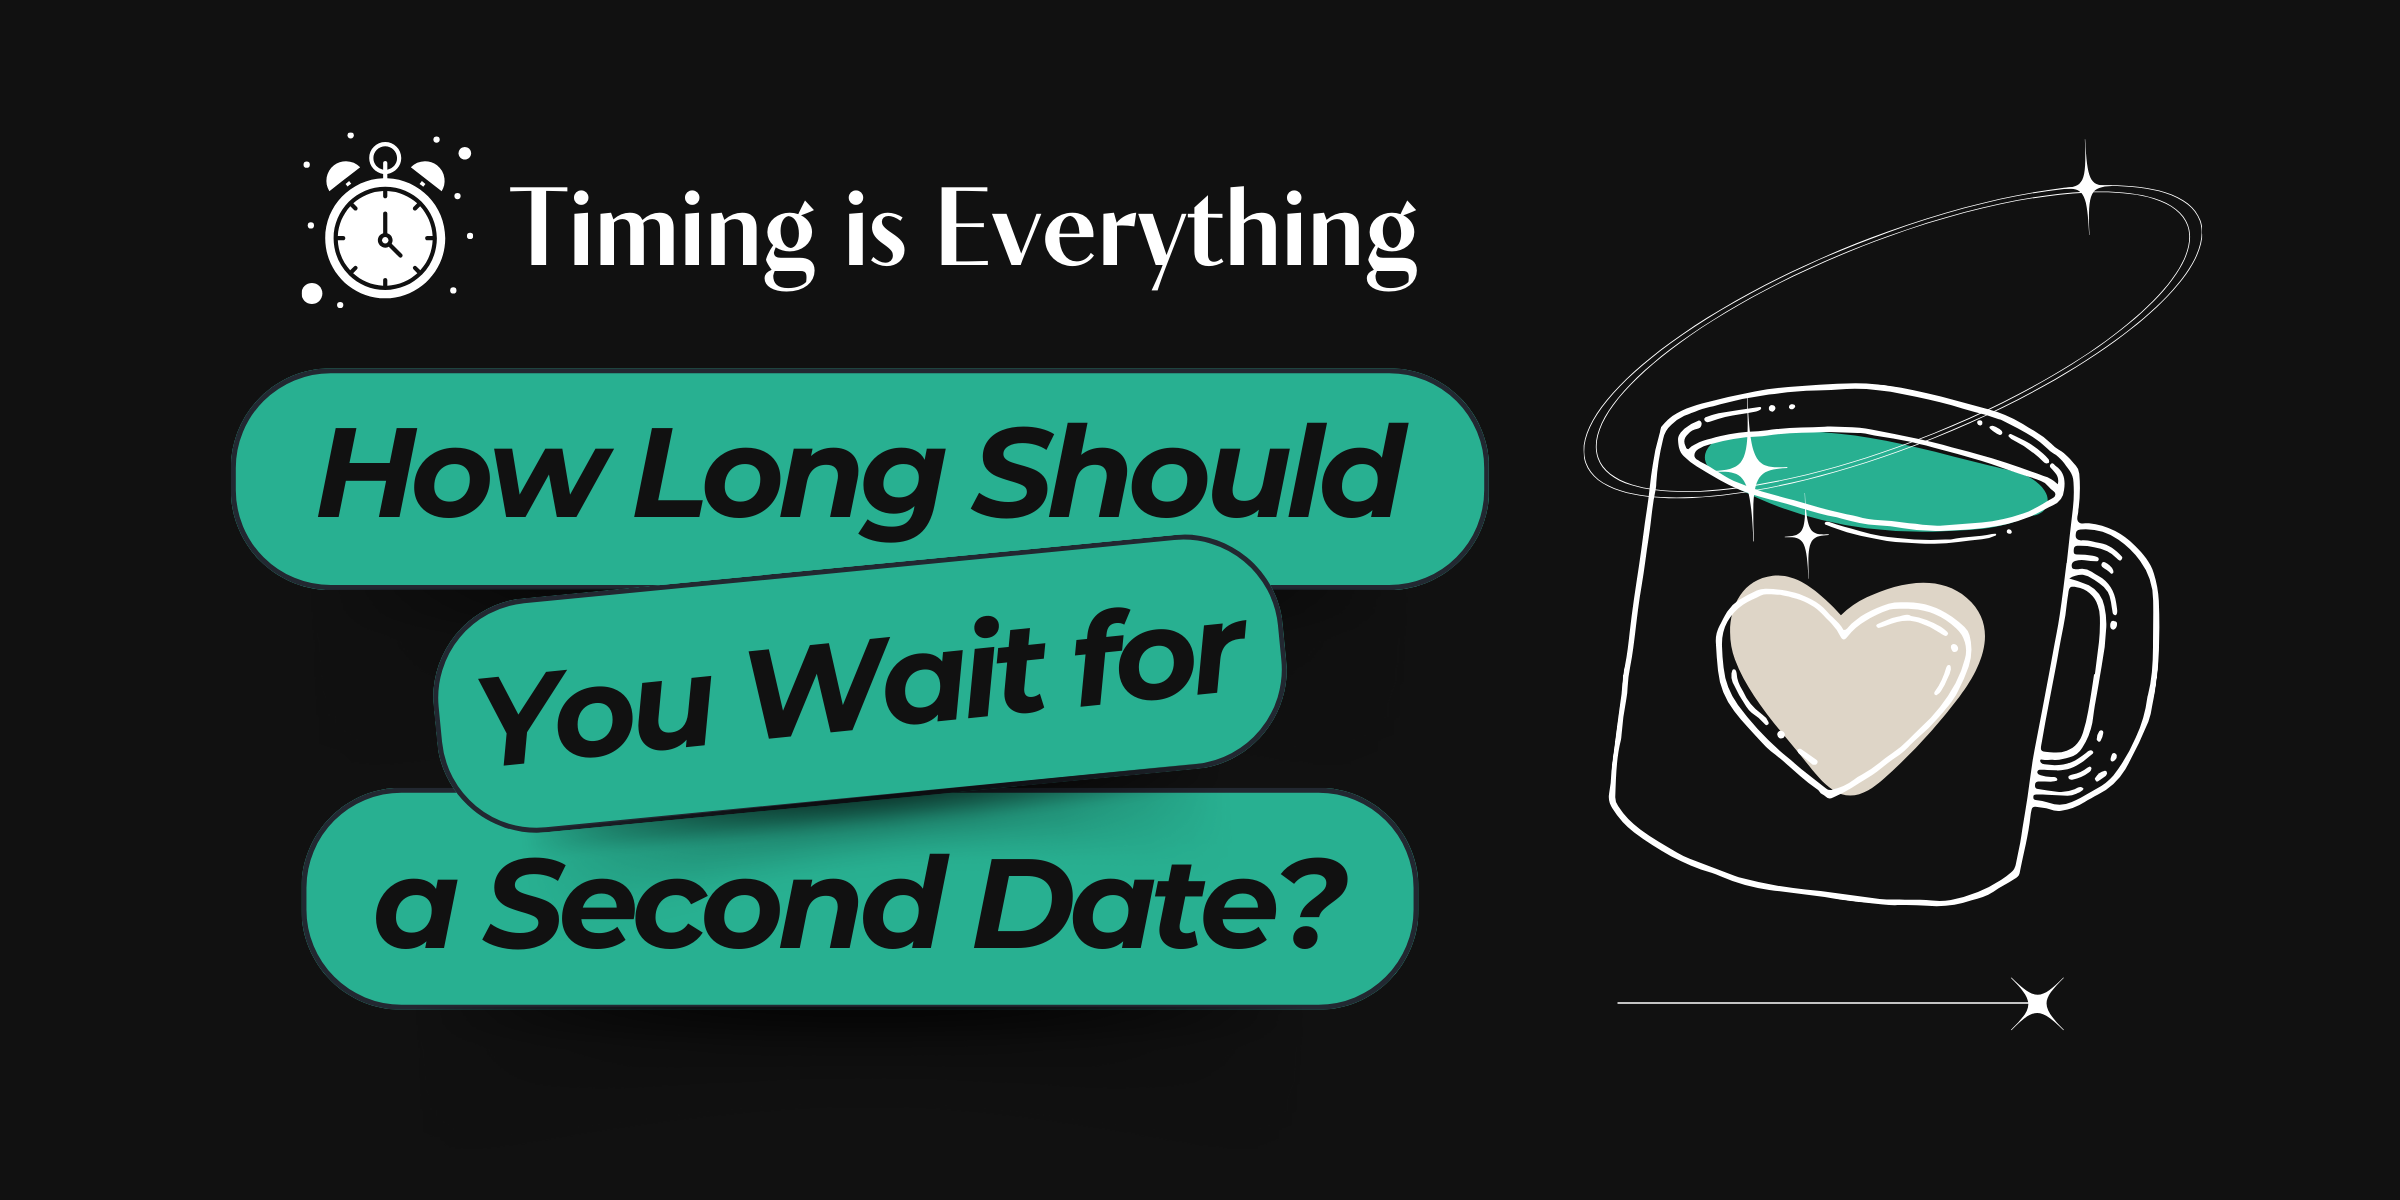 If you’ve had a successful first date and are wondering how long to wait for a second date, keep reading! We offer tips on timing, communication after the first date, and more.